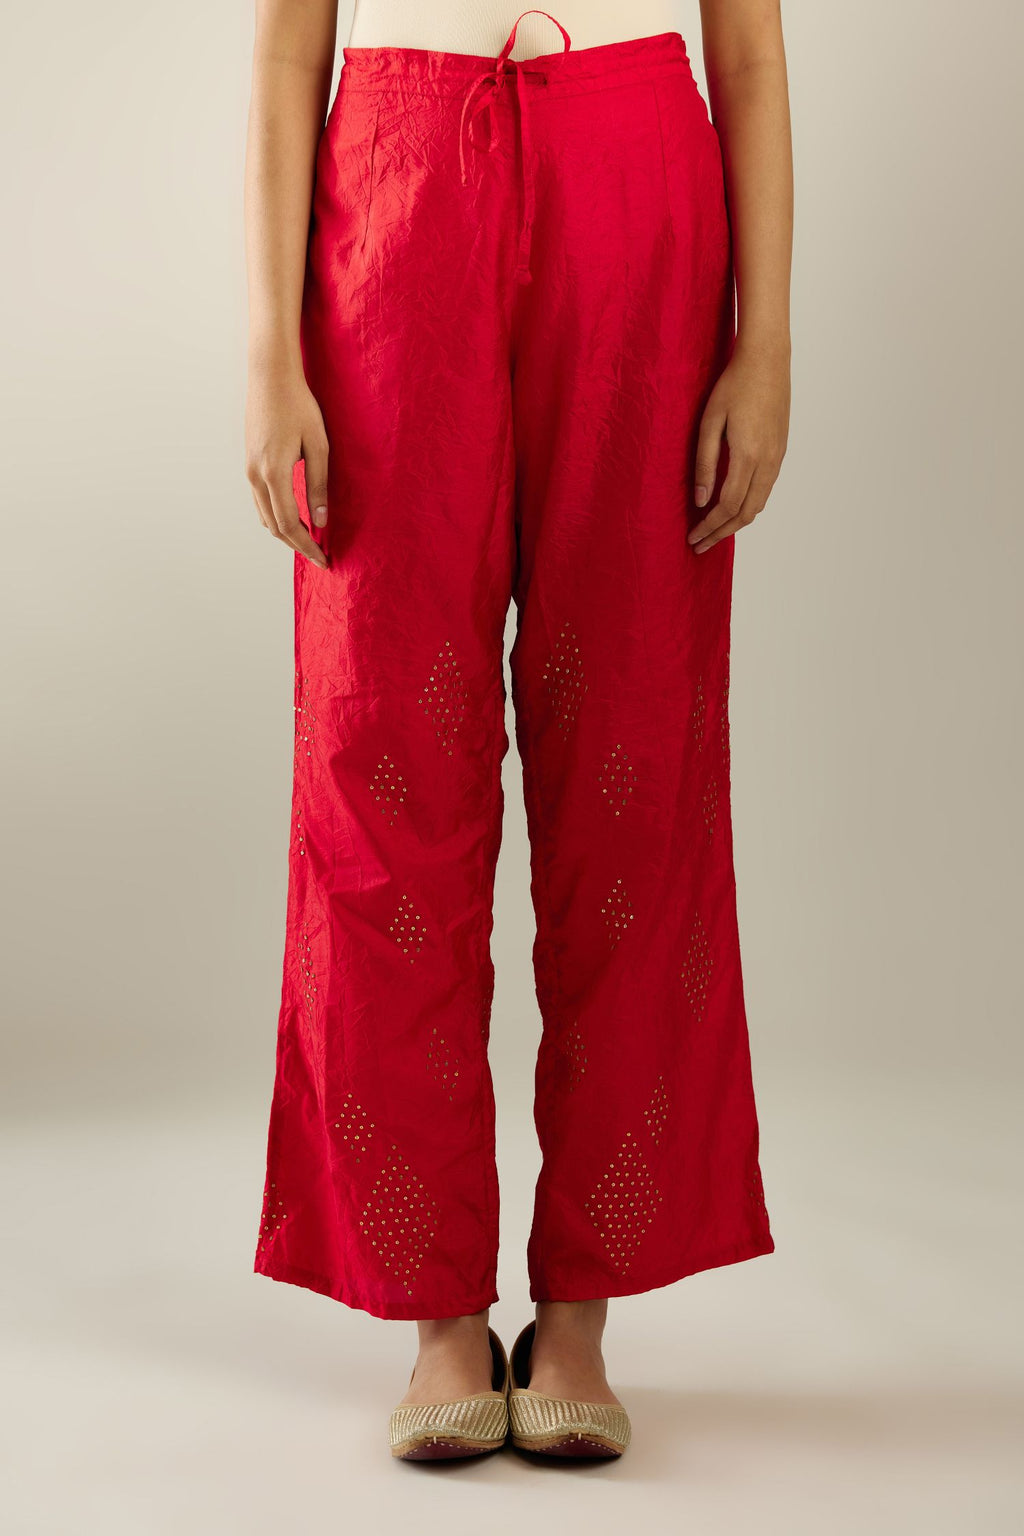 Red hand crushed pure silk straight pants with assorted diamond shape golden sequins work till knee length and side pockets.